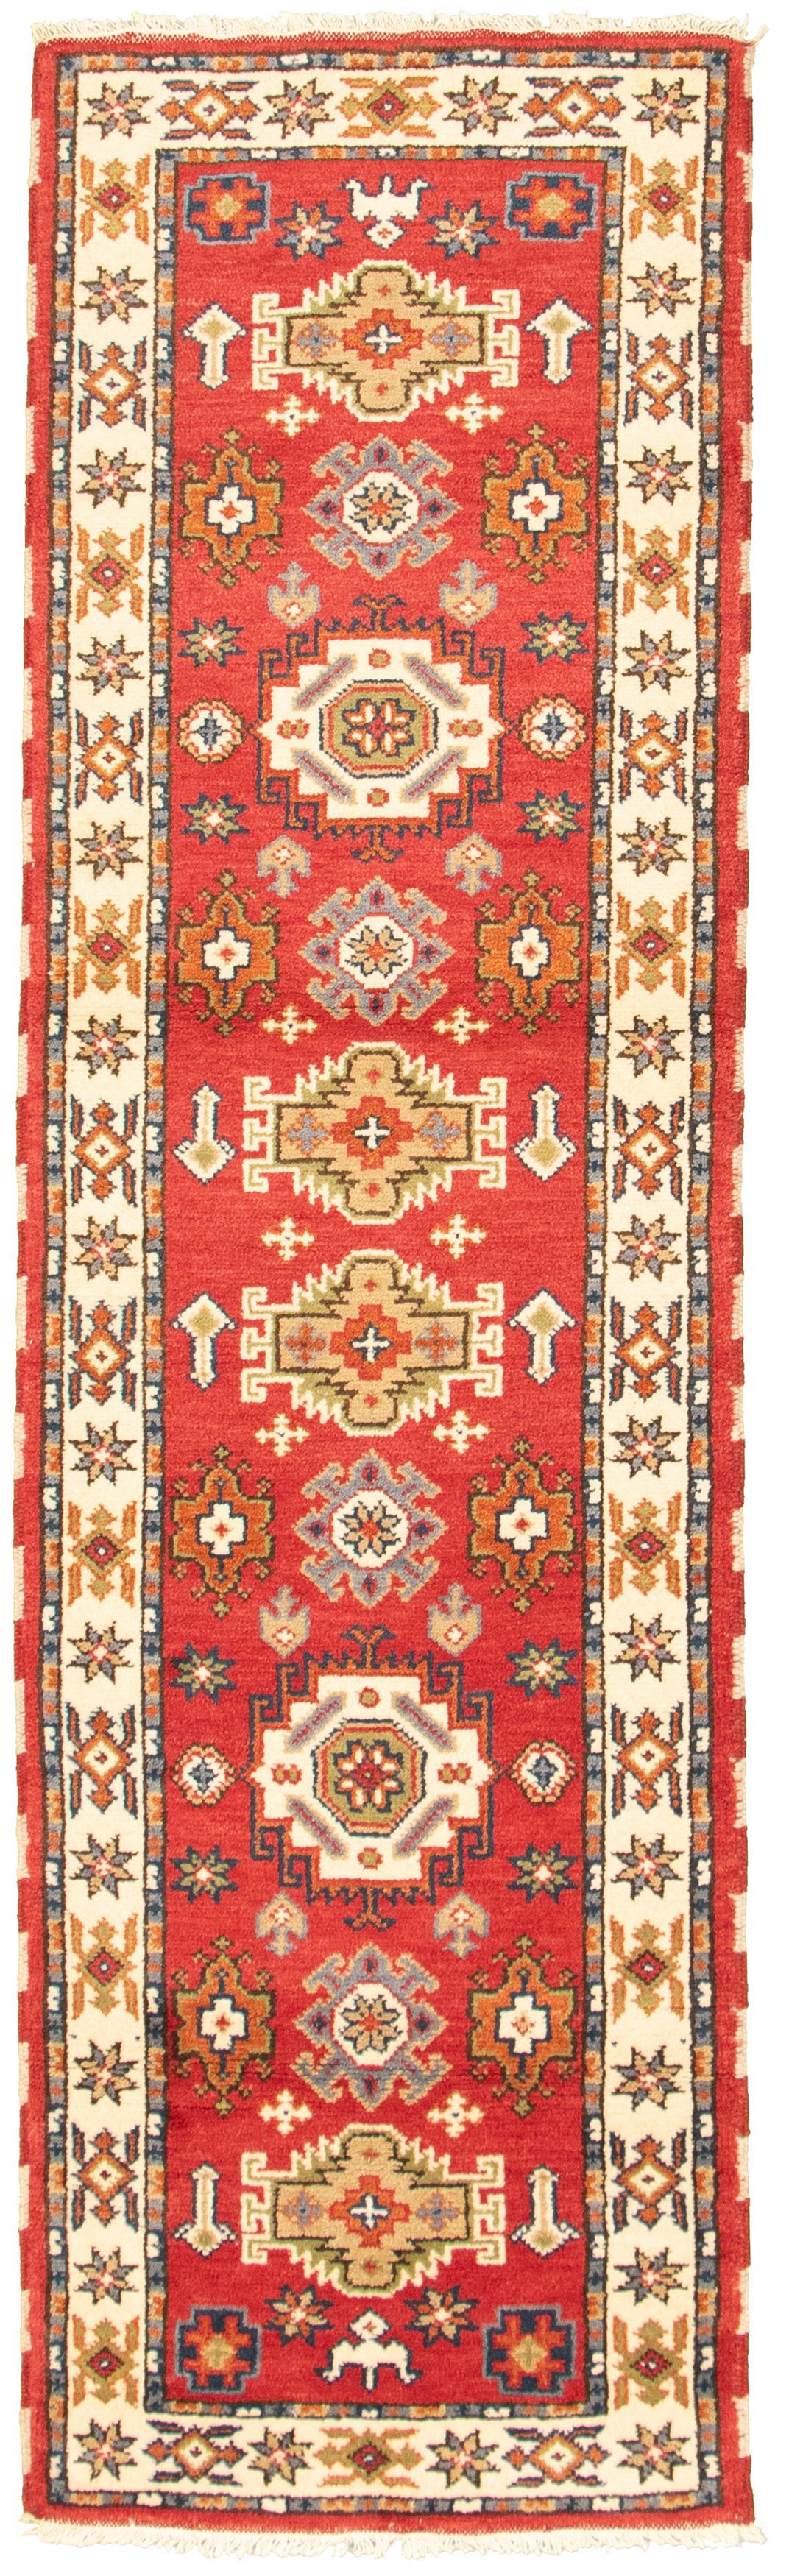 Hand-knotted Royal Kazak Red Wool Rug 2'8" x 9'1" Size: 2'8" x 9'1"  